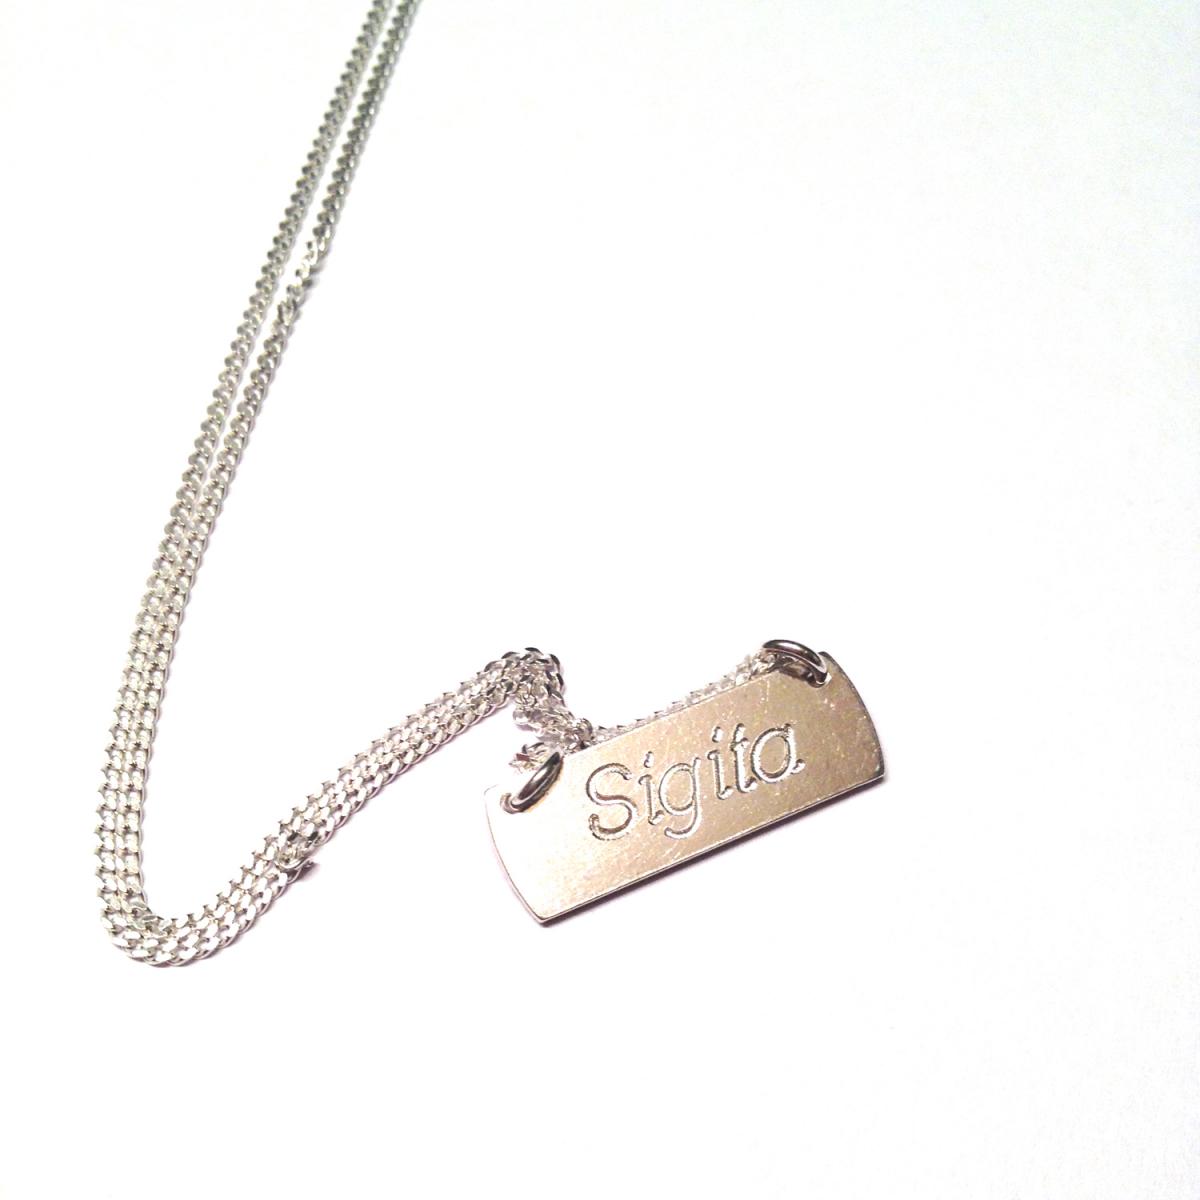 Limited Edition- Personalized Name Necklace - Sterling Silver 925 Pendant On 40cm Long Chain